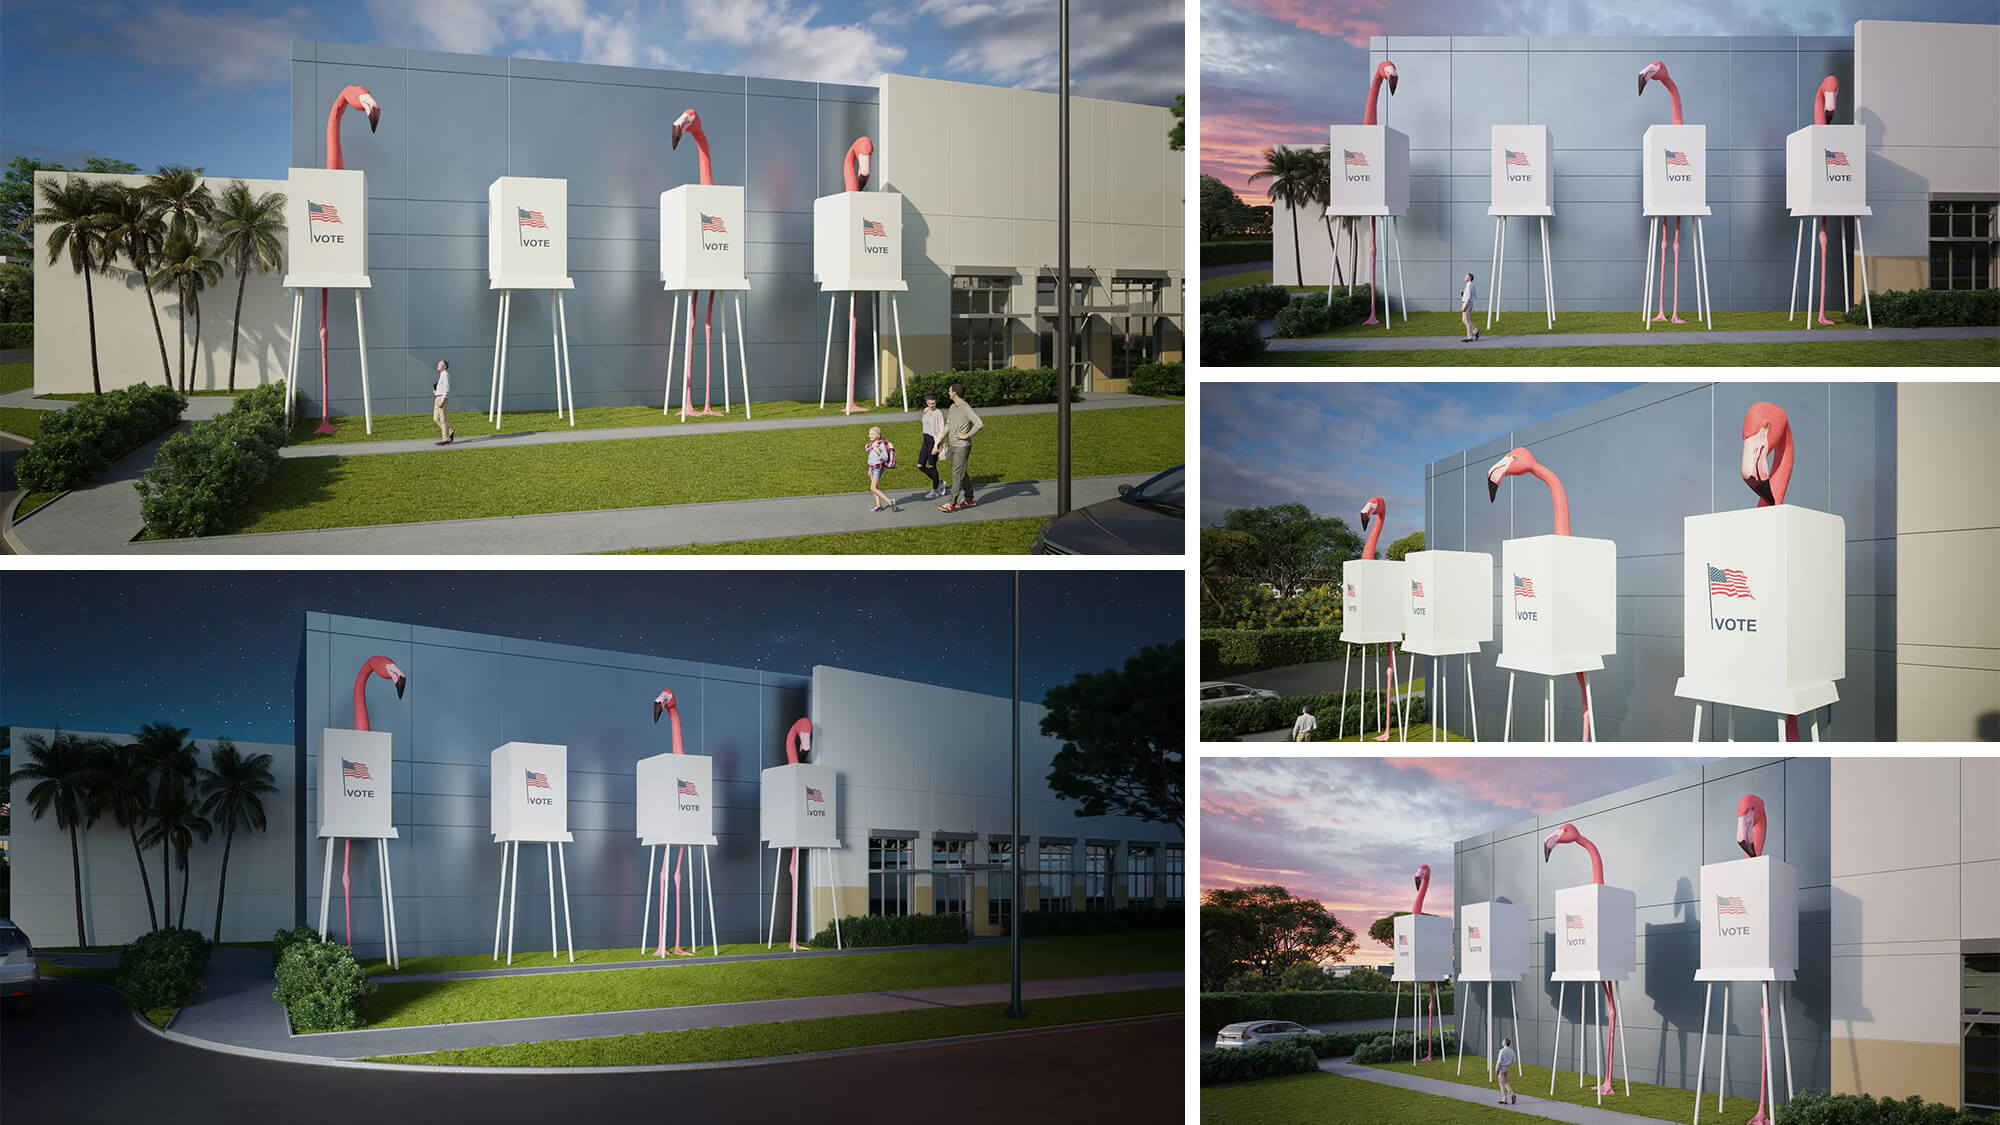 Final Results of a Public Art Installation CGI Project